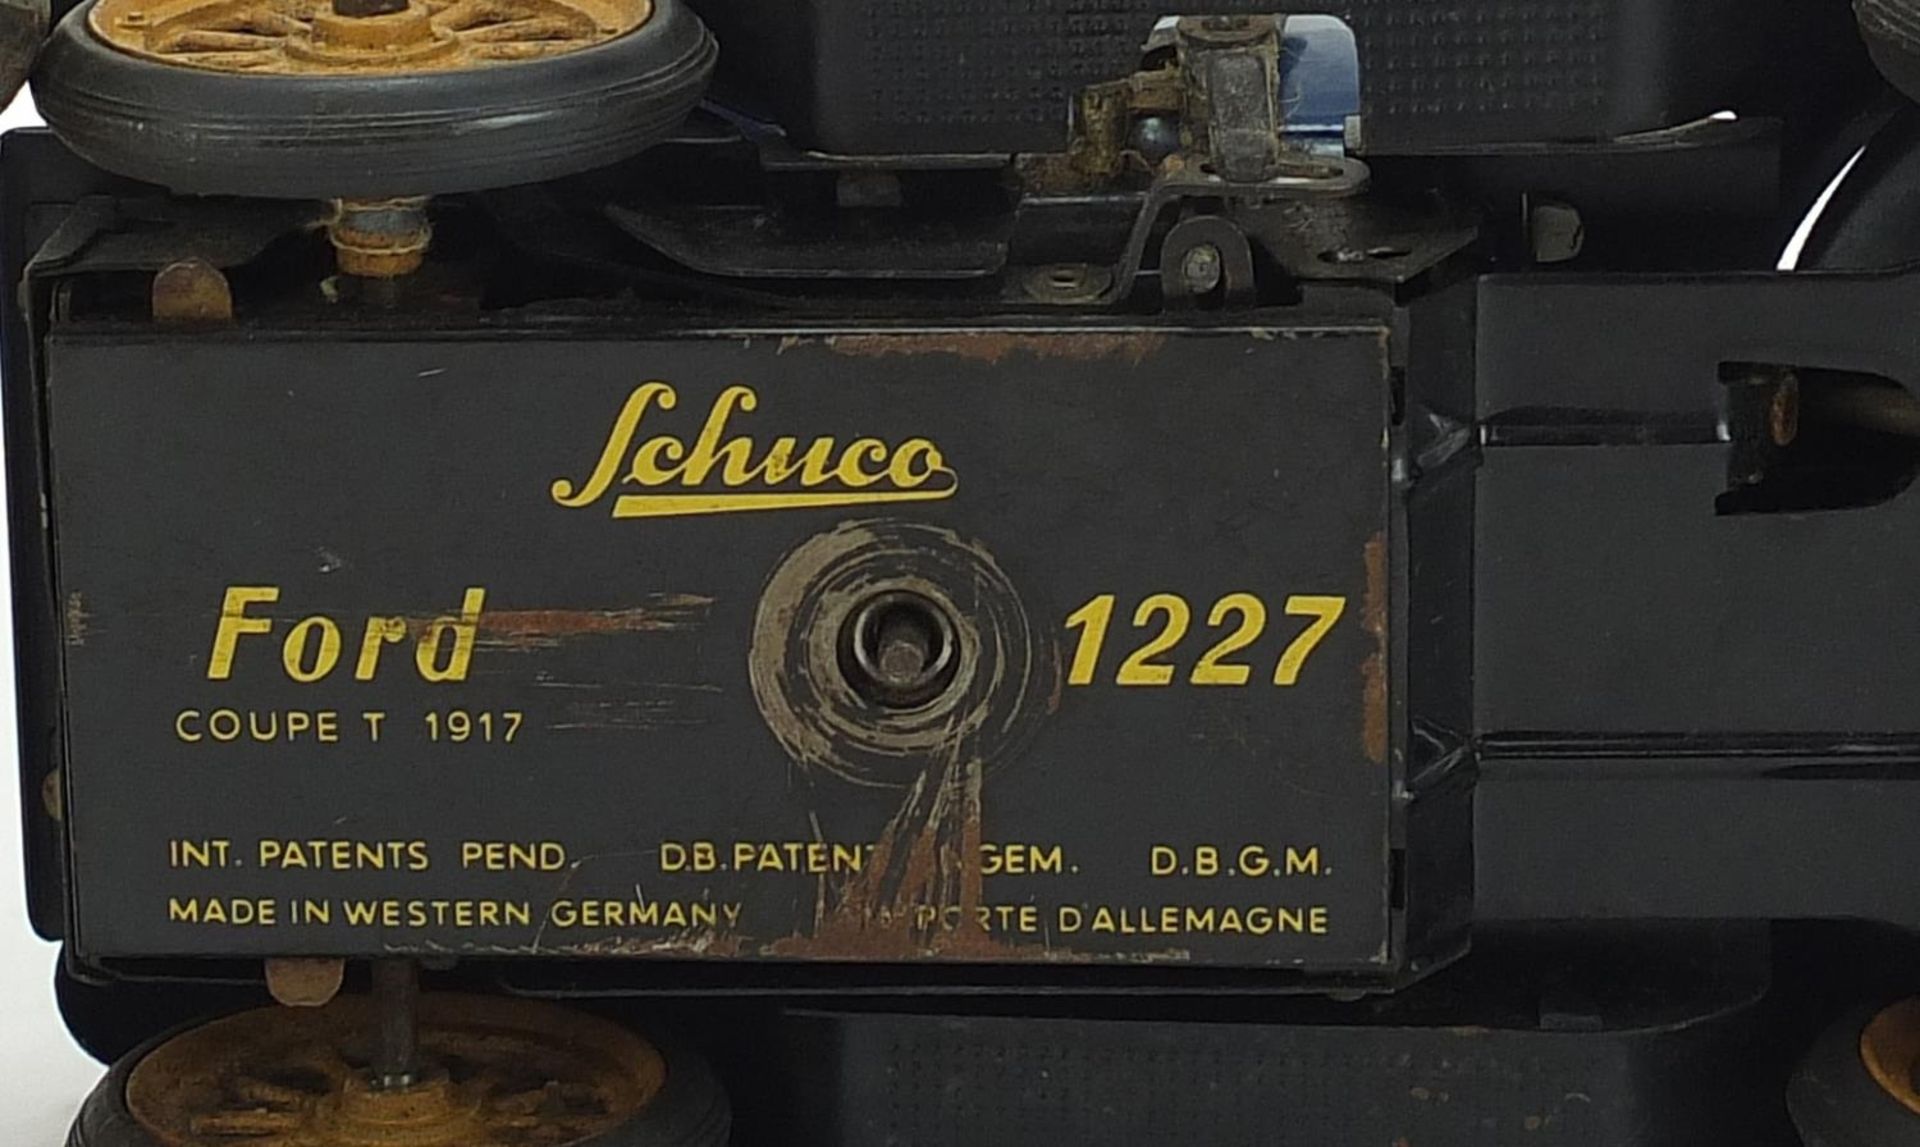 Antique and later tinplate toys comprising a Schuco Ford Coupet 1917, Chad Valley Harborme car and a - Image 6 of 6